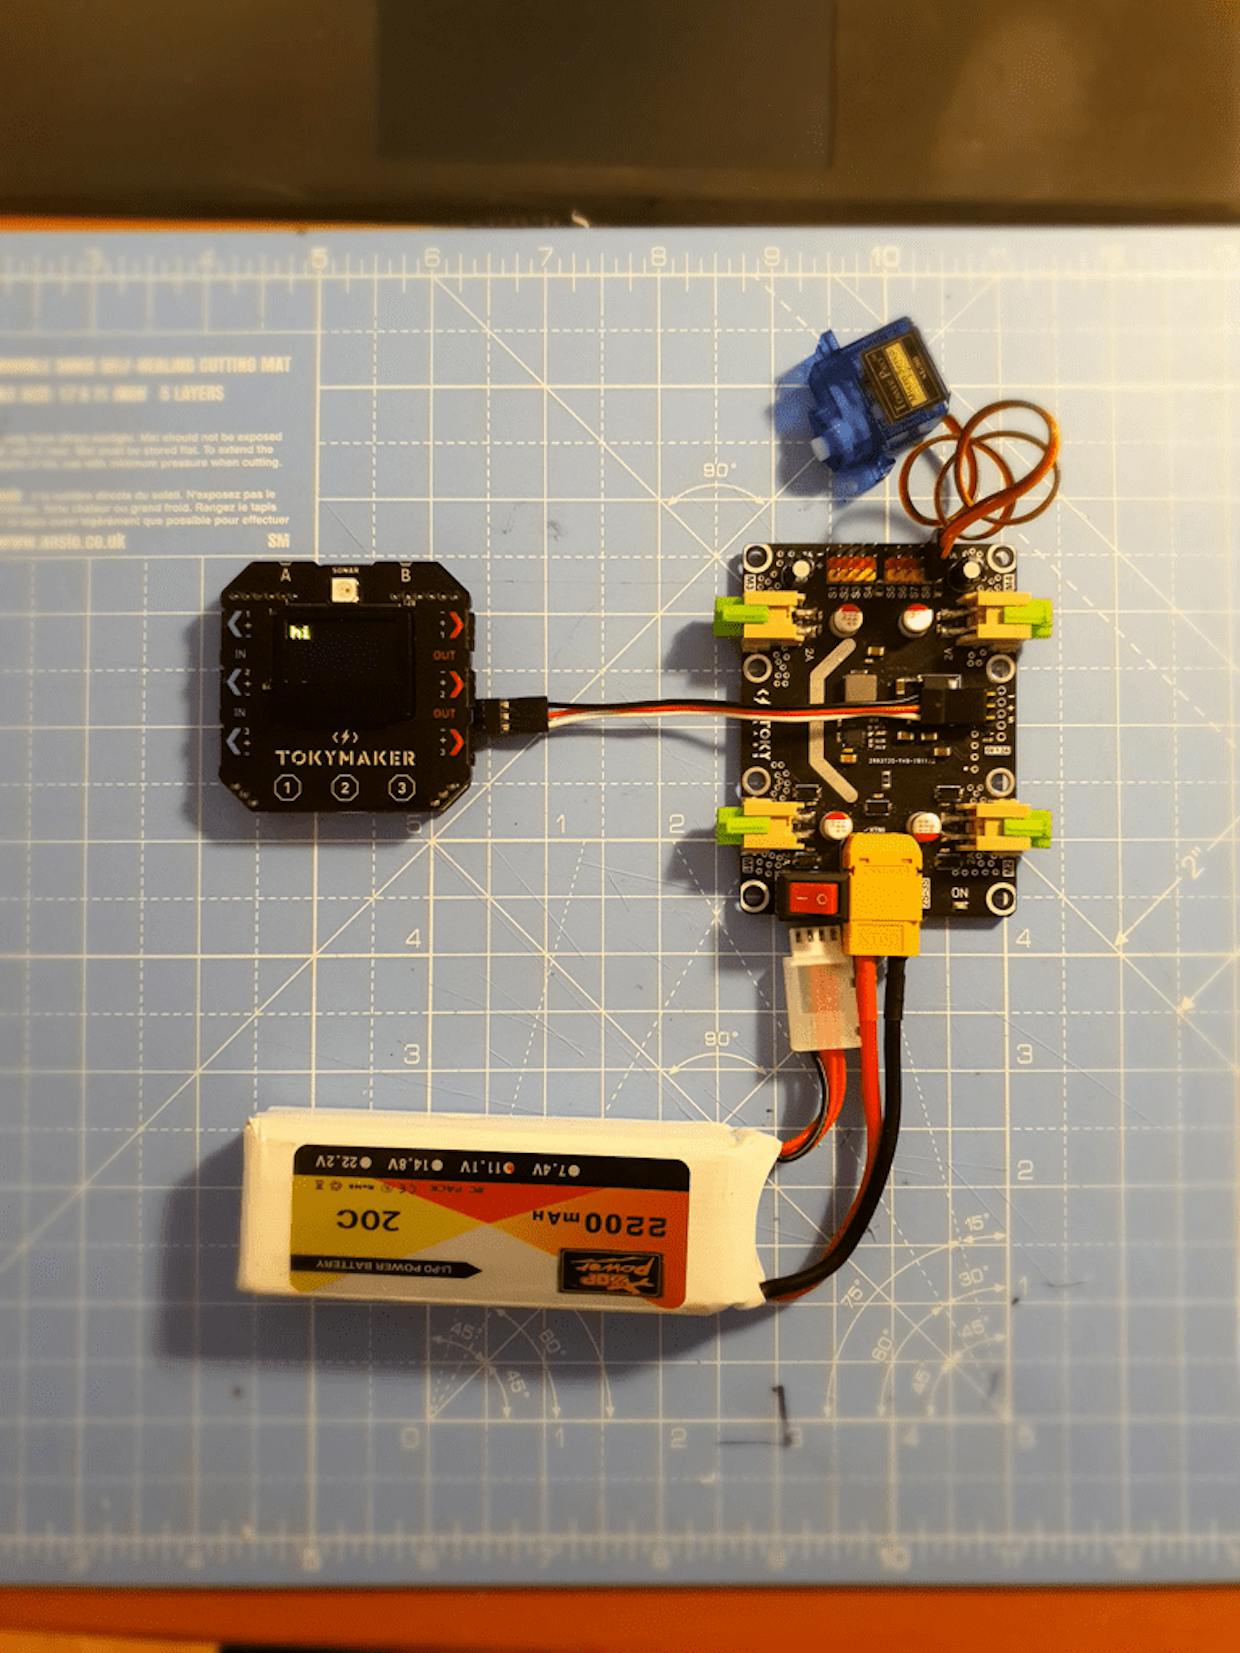 How to connect the Motor Shield to the Servos and the Tokymaker?